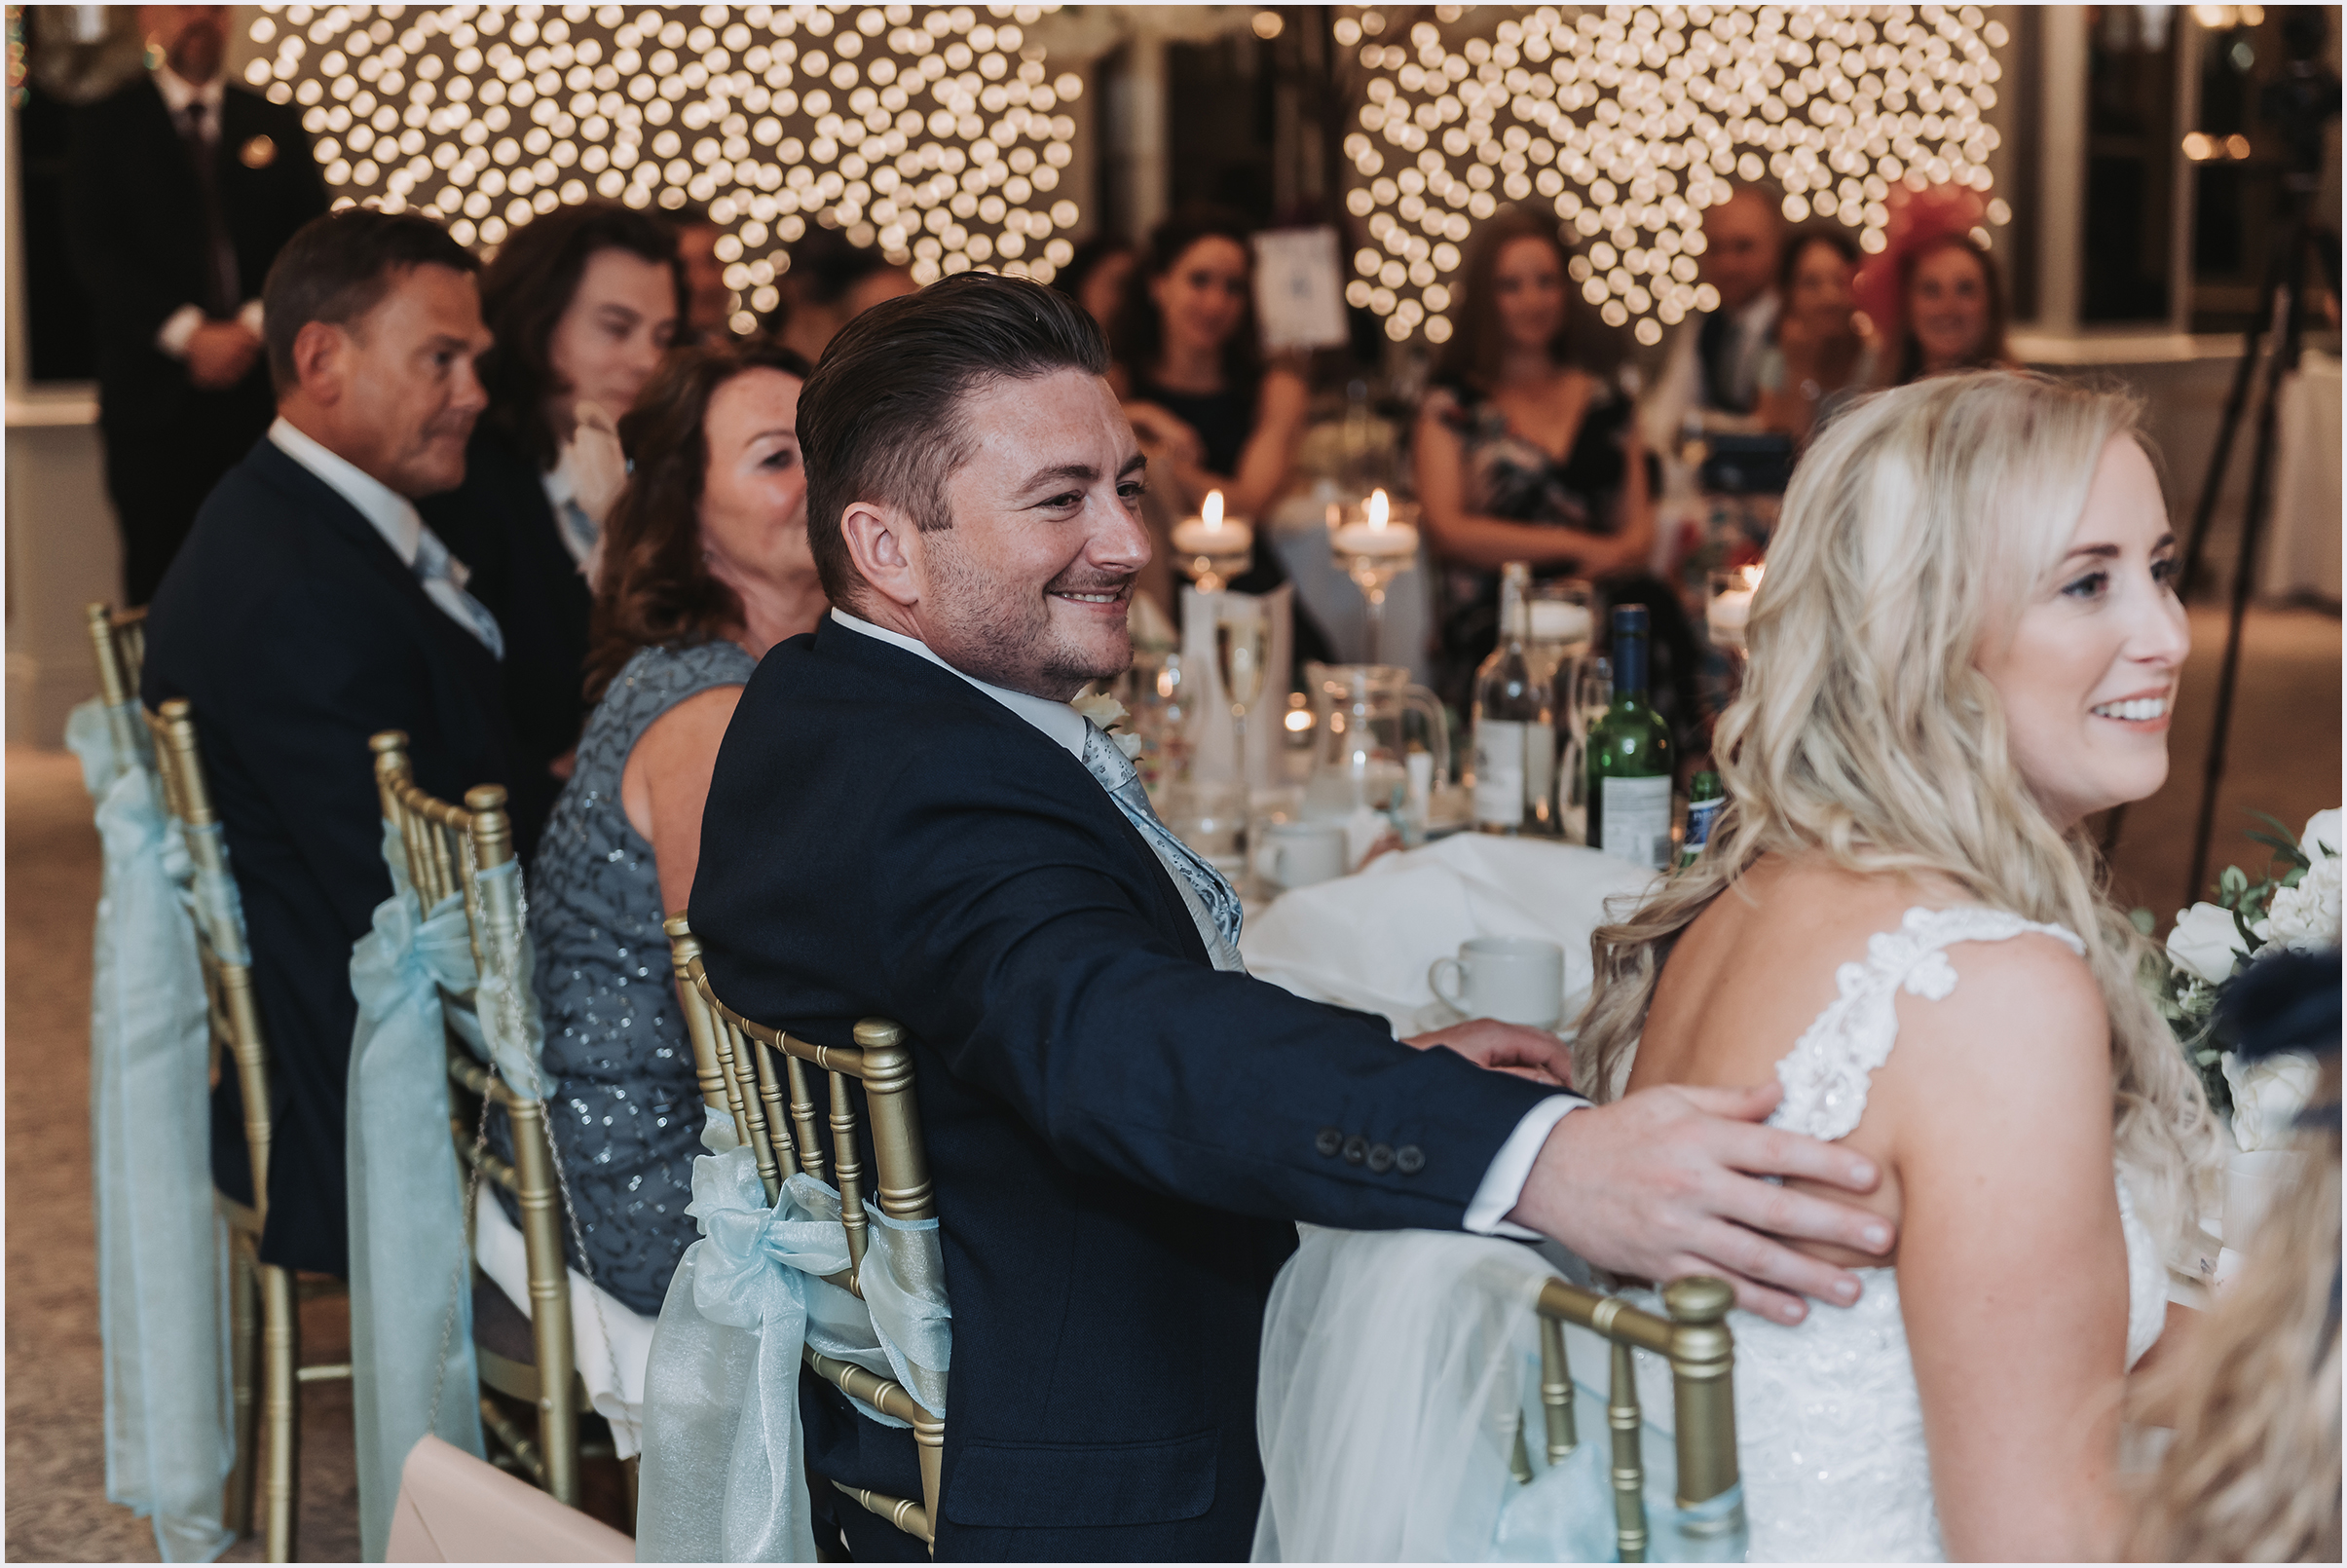 A bride smiles with his arm around his new bride's back as the speeches are said at The Grosvenor Pulford Hotel and Spa.